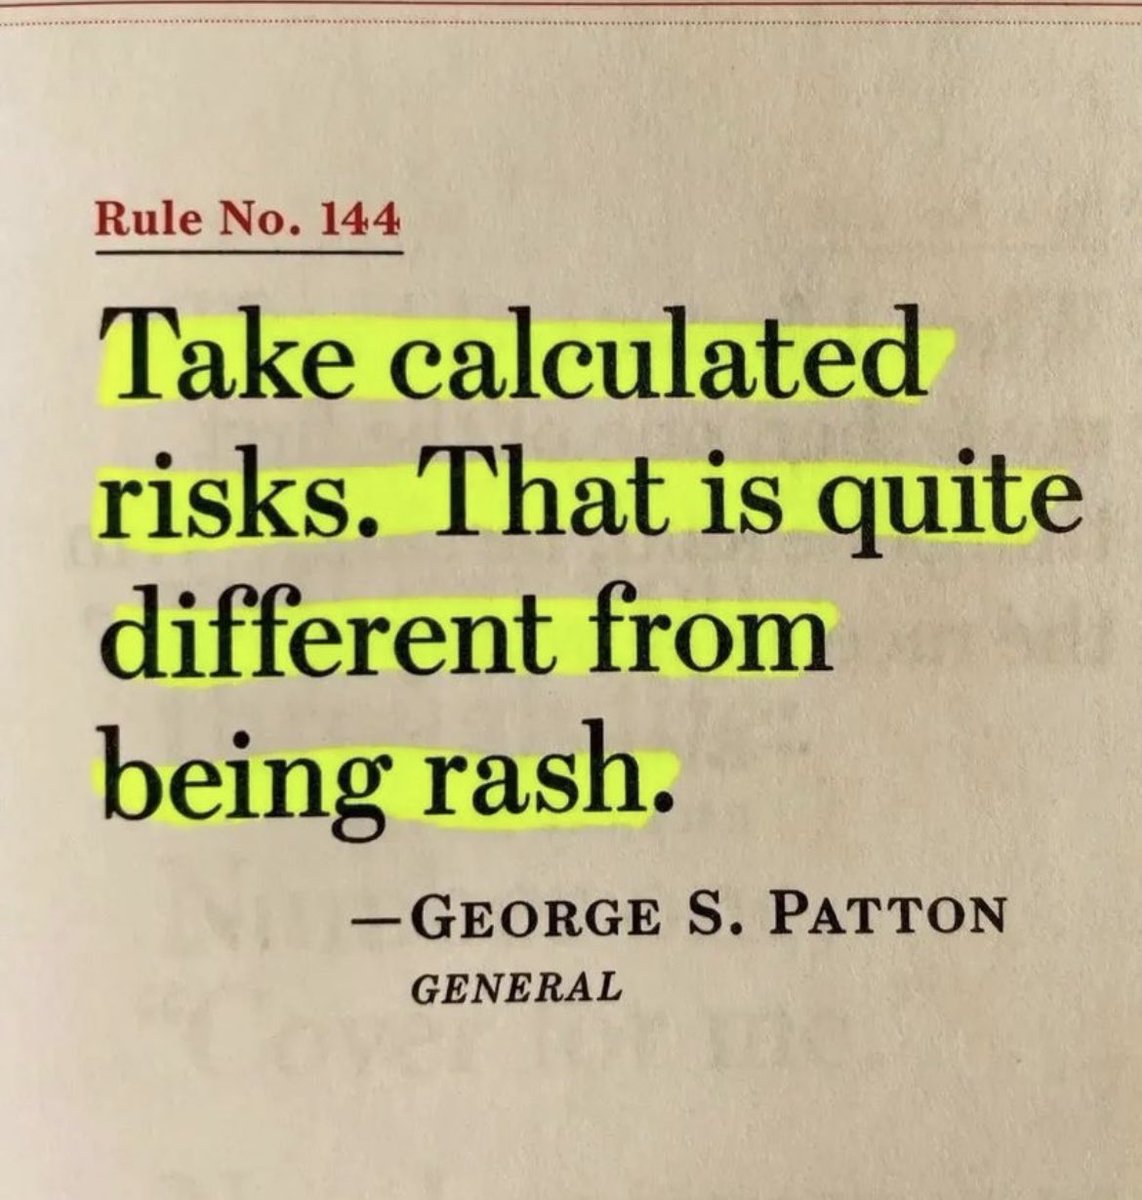 Being a risk taker comes natural for some and is more challenging for others. I took a calculated risk in 1984 and became the #RussianNightmare …the rest is ‘history’ as they say. Before you make a rash decision, consider the risk. Then, step out and go for it. #ItsTimeToManUp